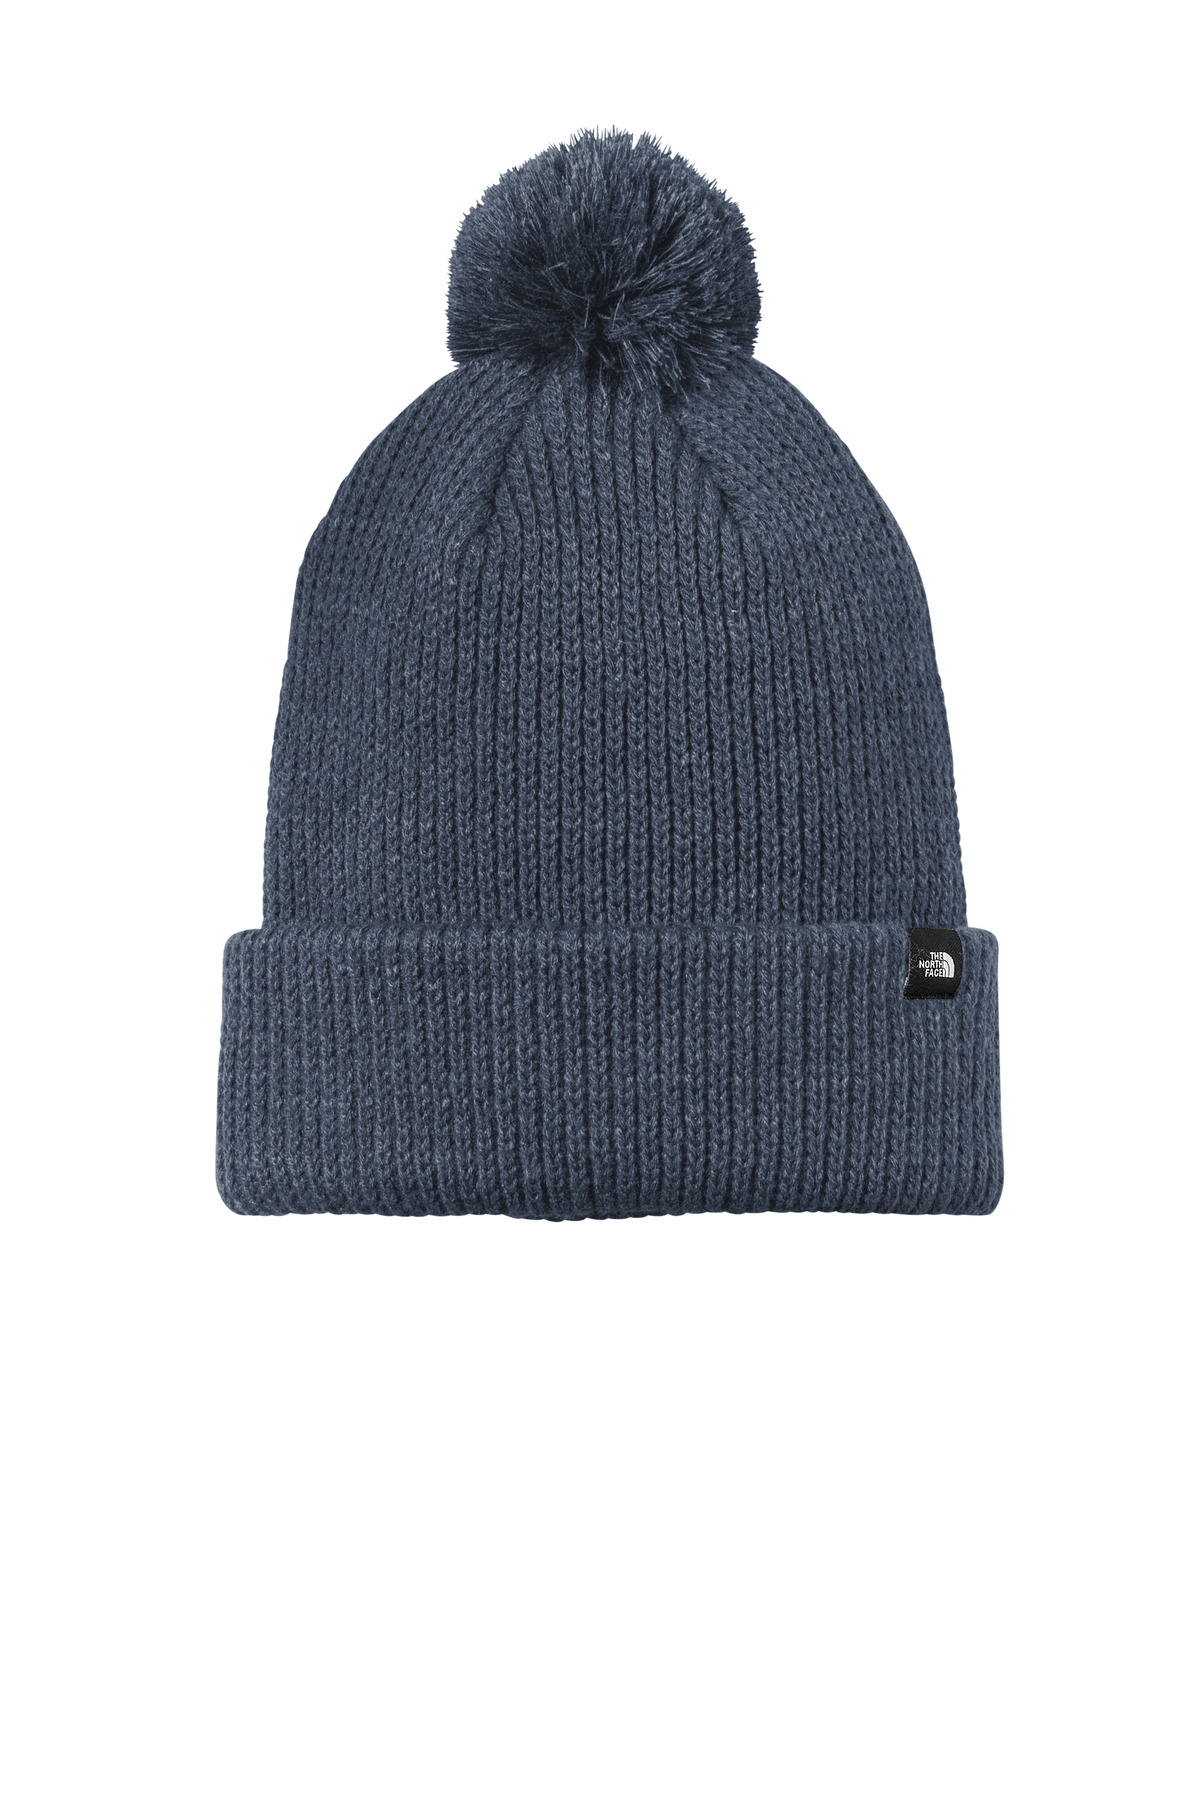 The North Face Pom Beanie-The North Face